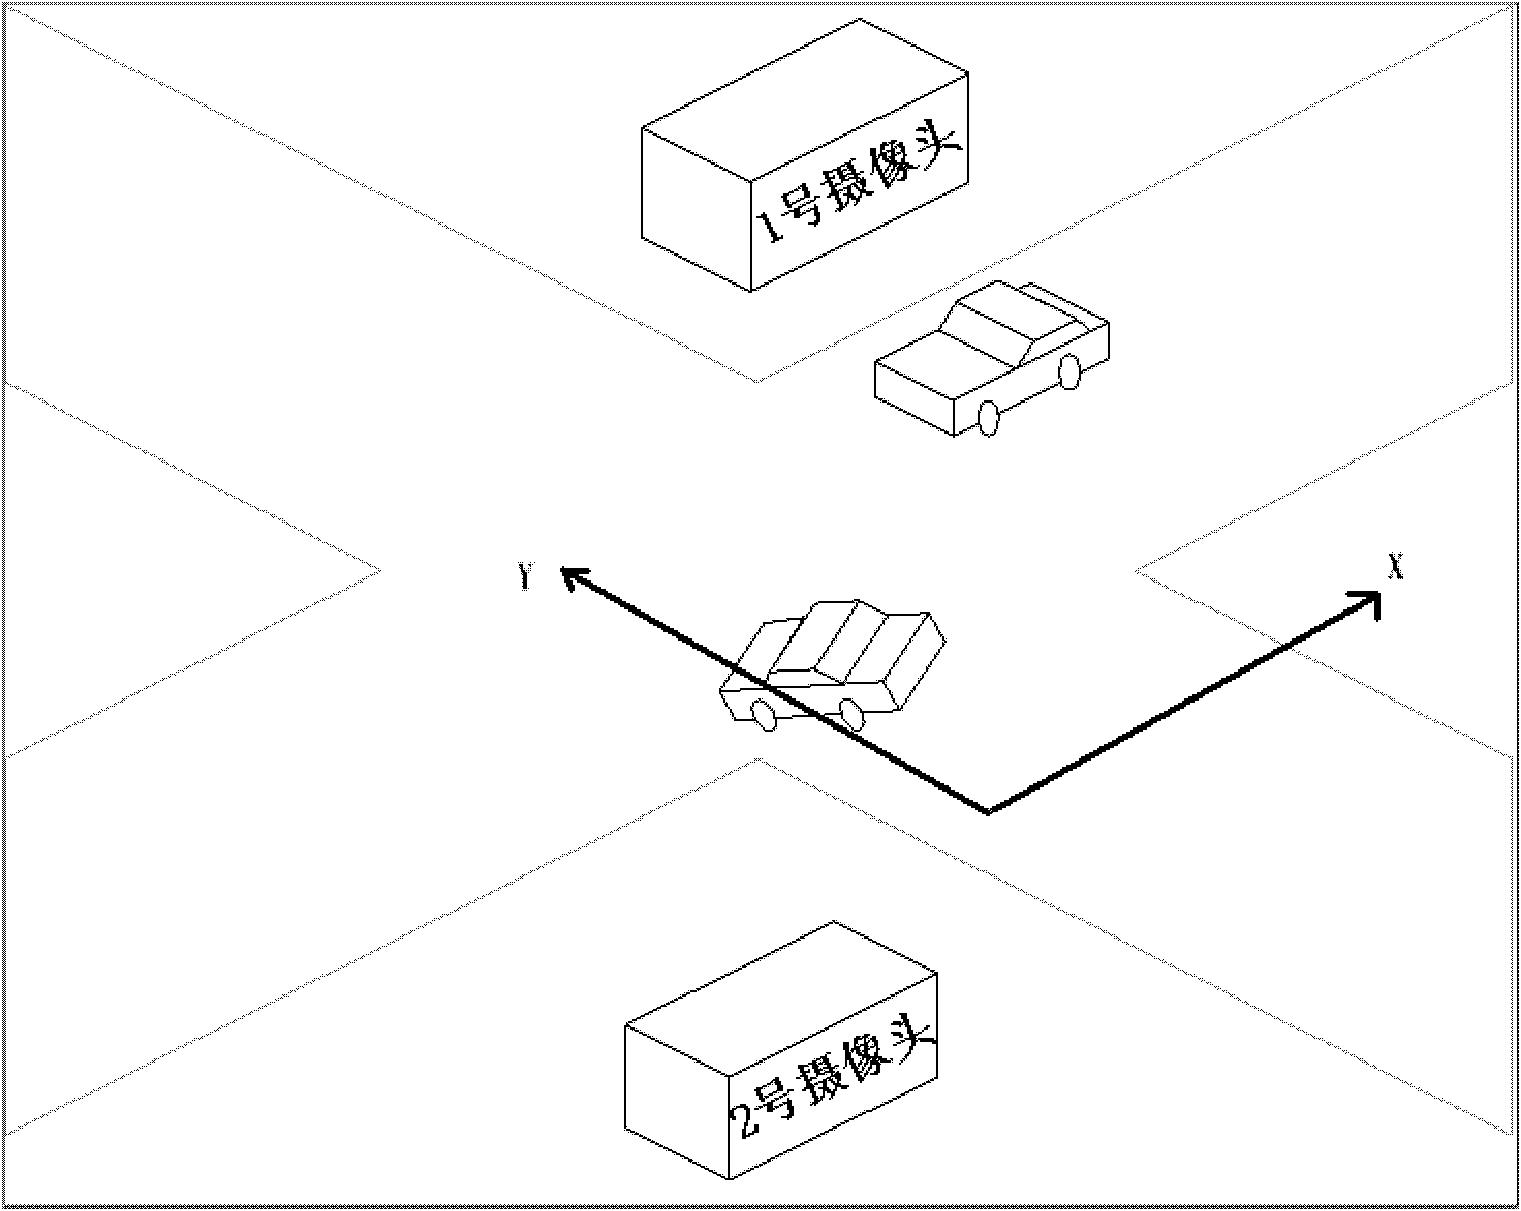 Method for detecting traffic conflicts at plane intersection based on video fusion